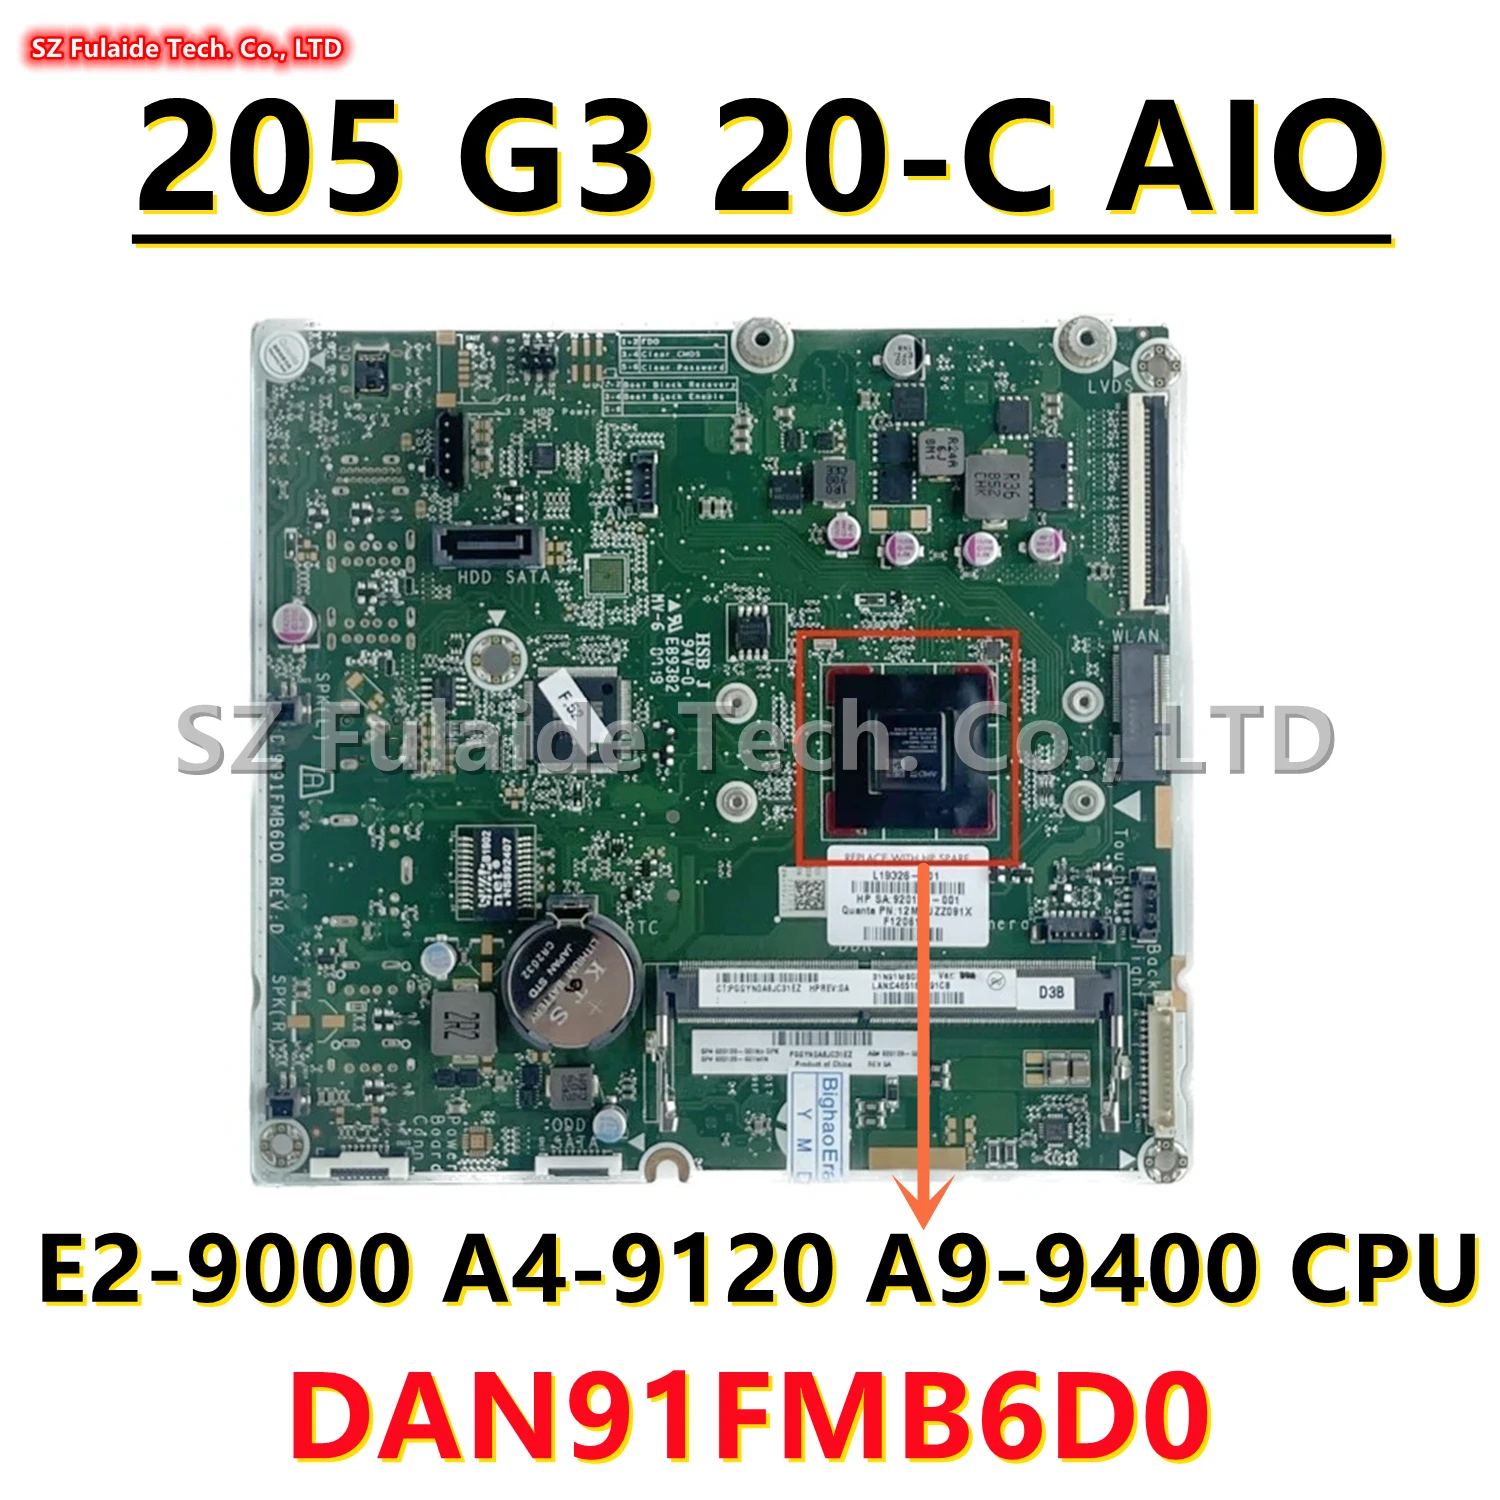 

L19326-601 920128-001 920128-601 920128-004 For HP 205 G3 20-C AIO Motherboard With E2-9000 A4-9120 A9-9400 CPU DAN91FMB6D0